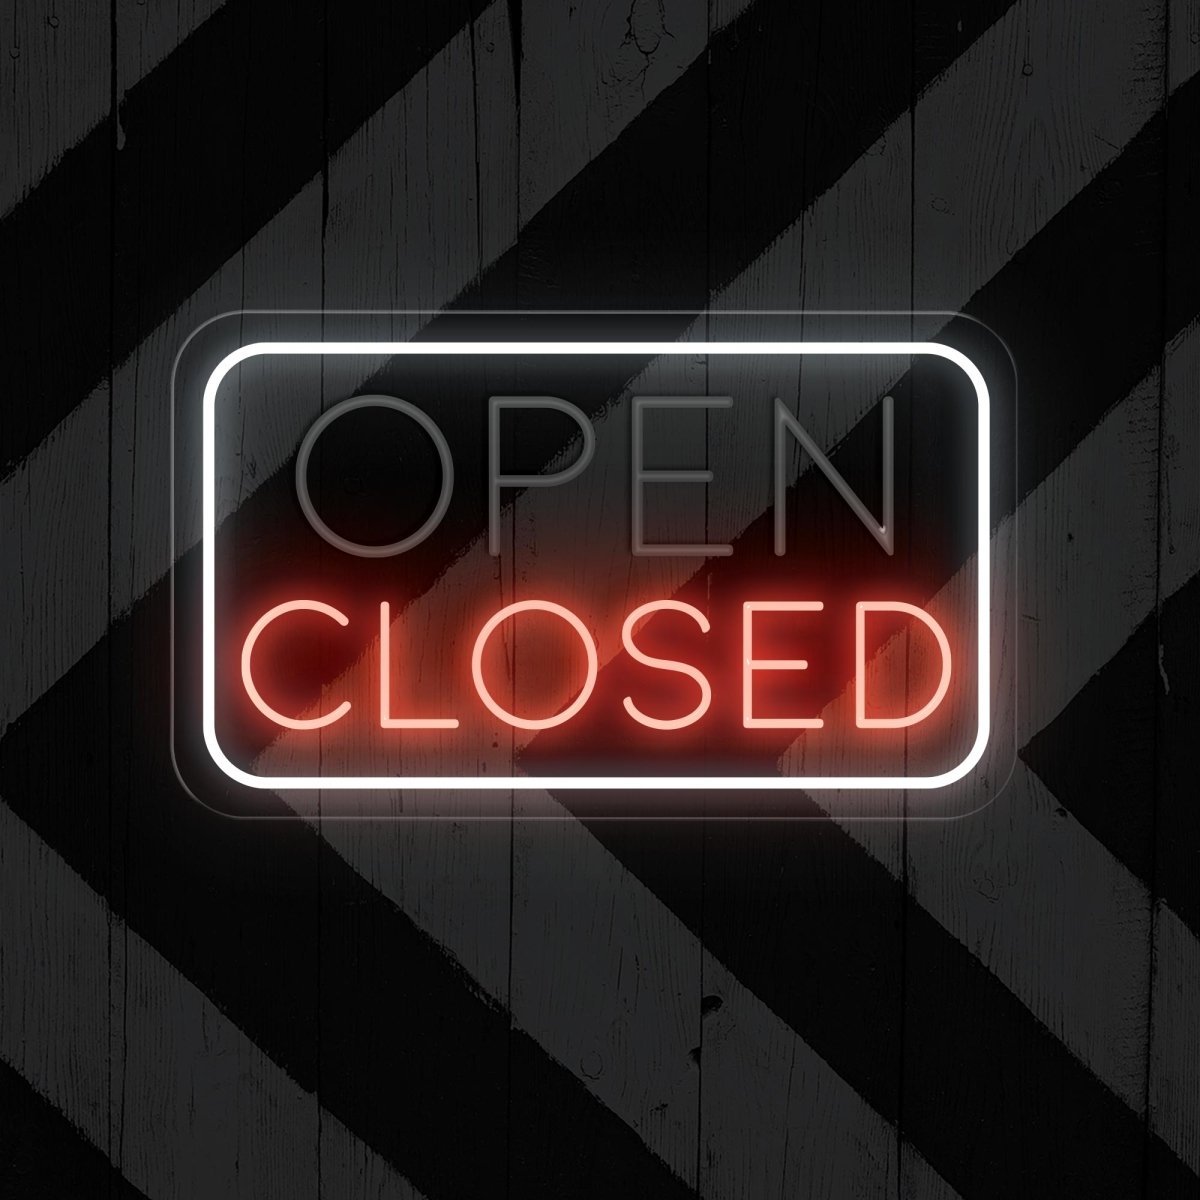 Dual LED Open/Closed Neon Sign - NEONXPERT